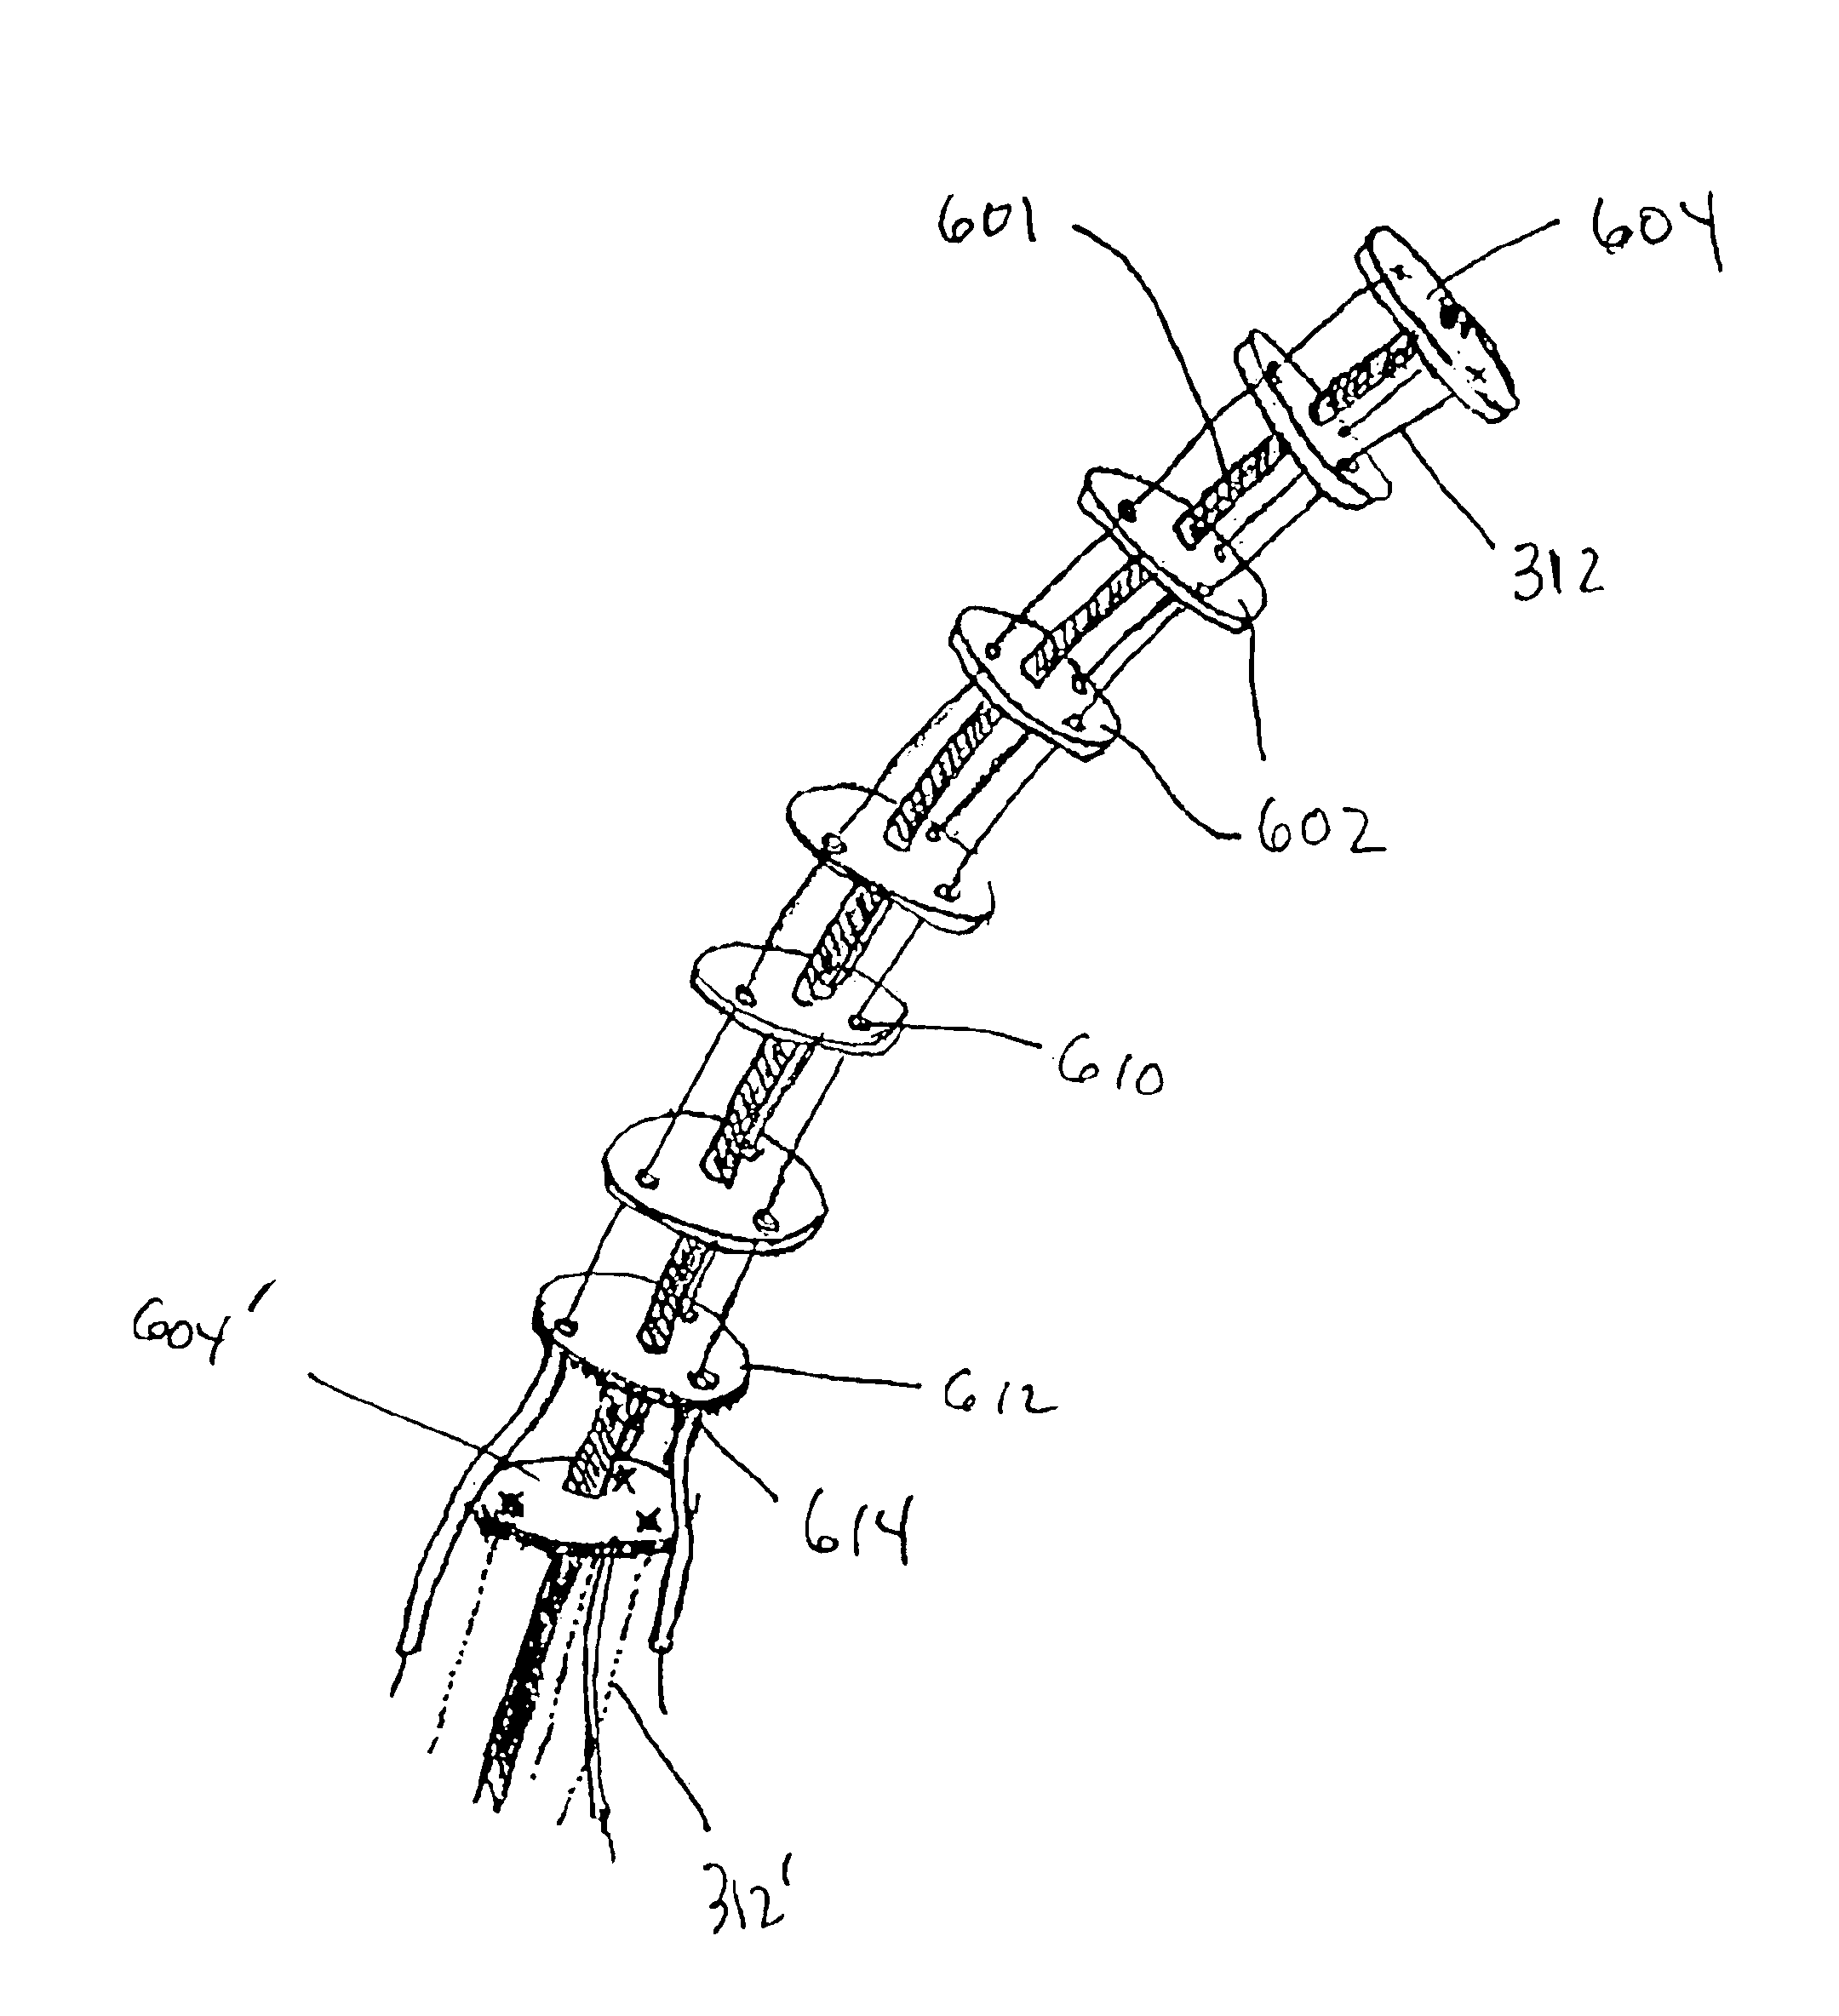 Tendon-driven endoscope and methods of insertion